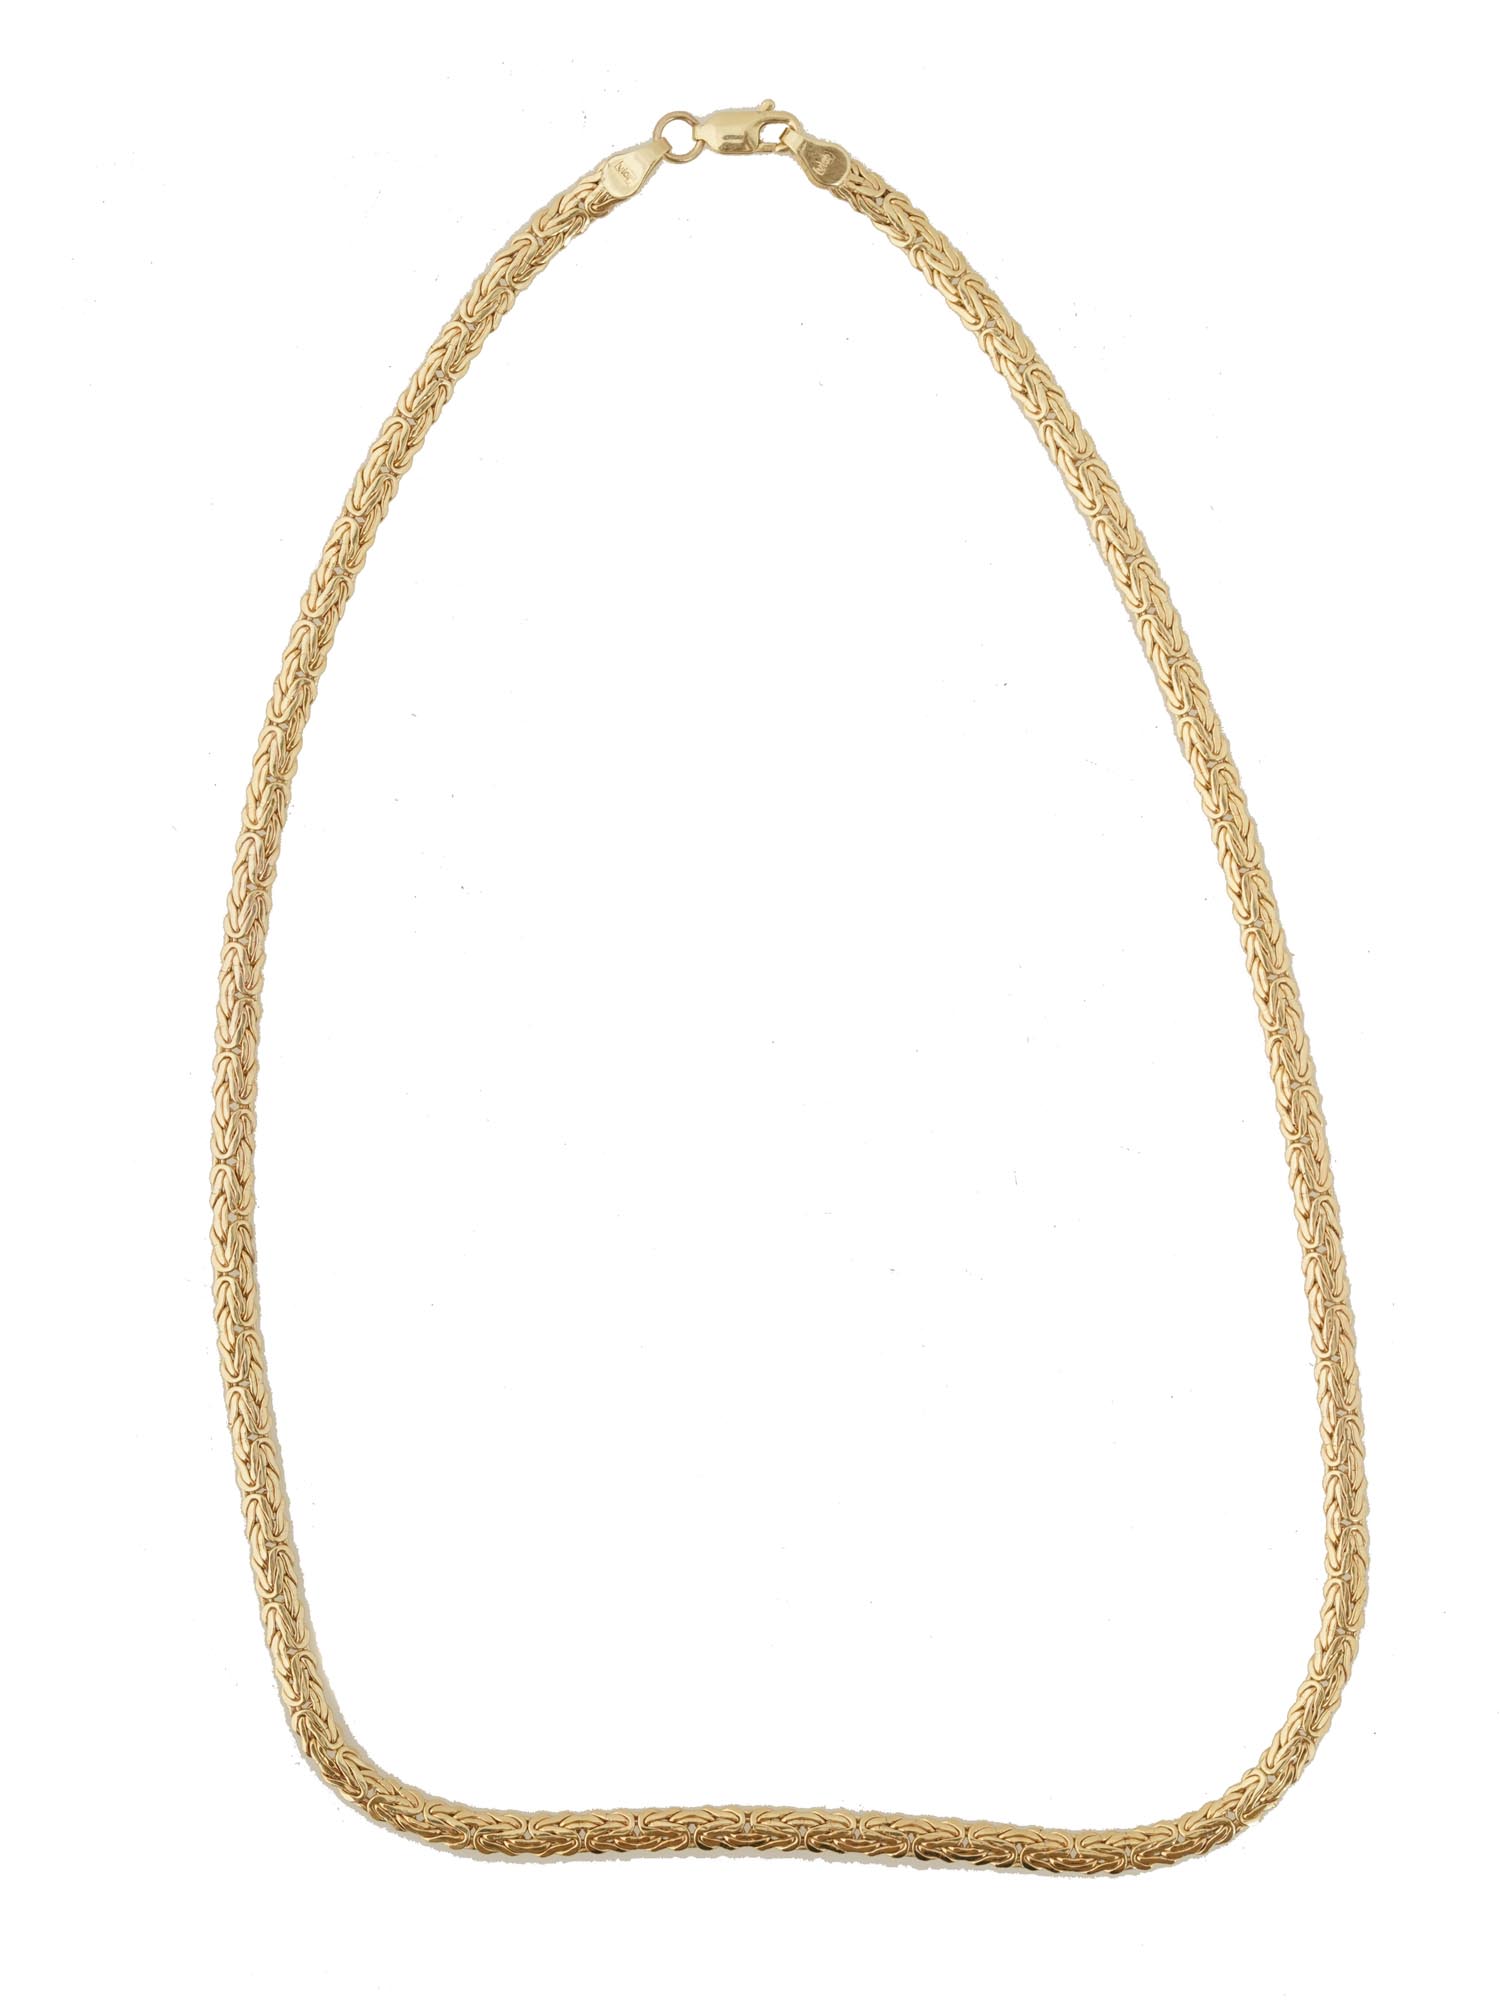 14K GOLD FLAT BYZANTINE CHAIN NECKLACE BY VIOR PIC-1